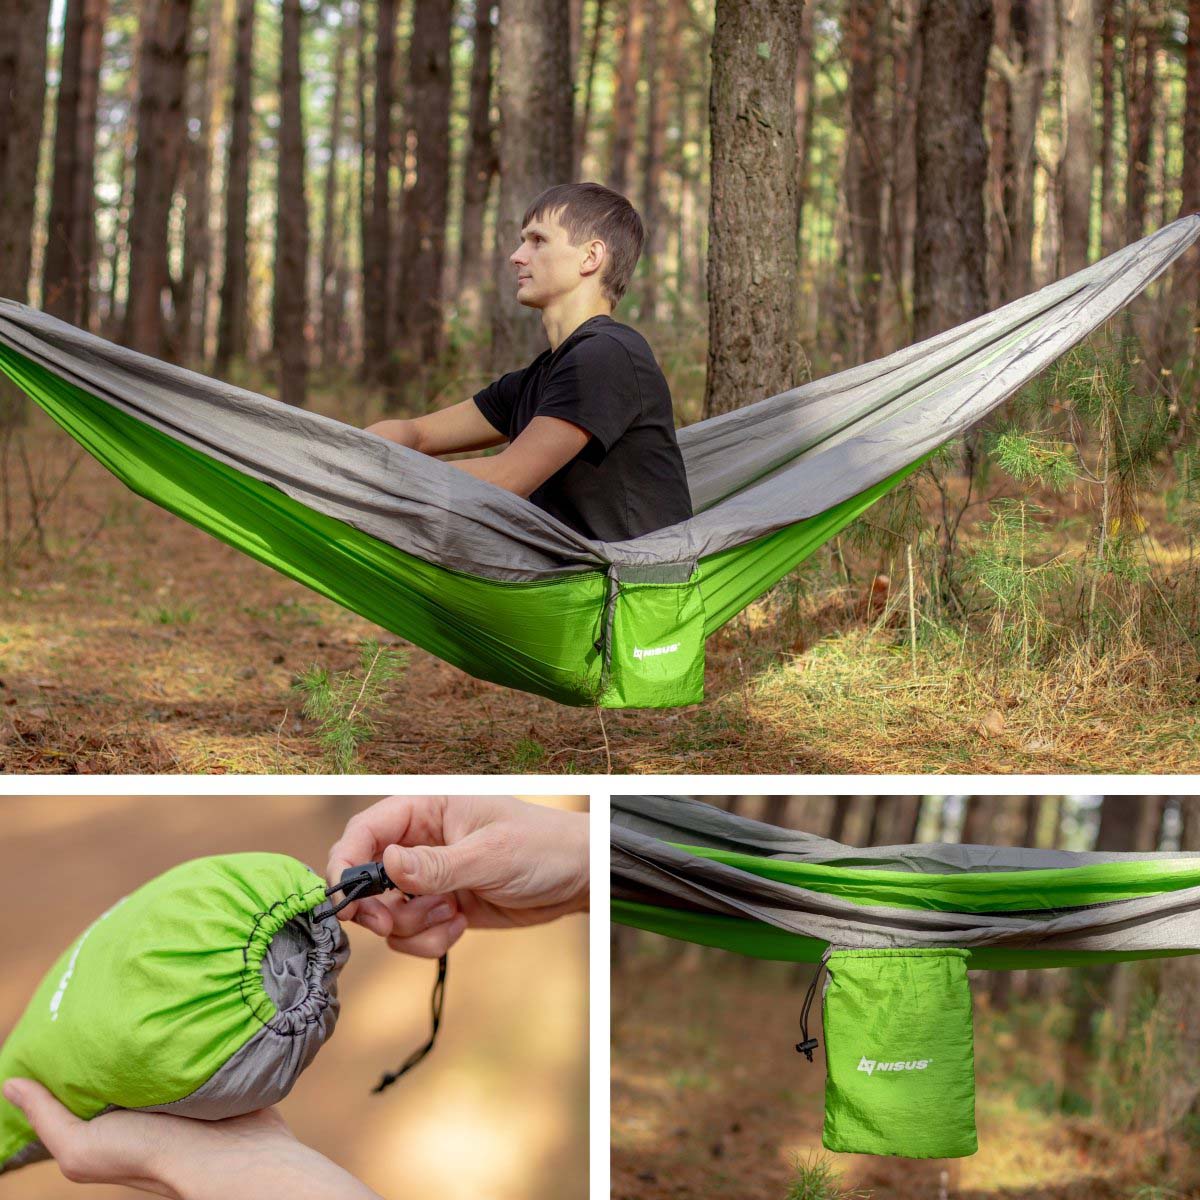 Man sitting in Nisus green camping hammock in the forest